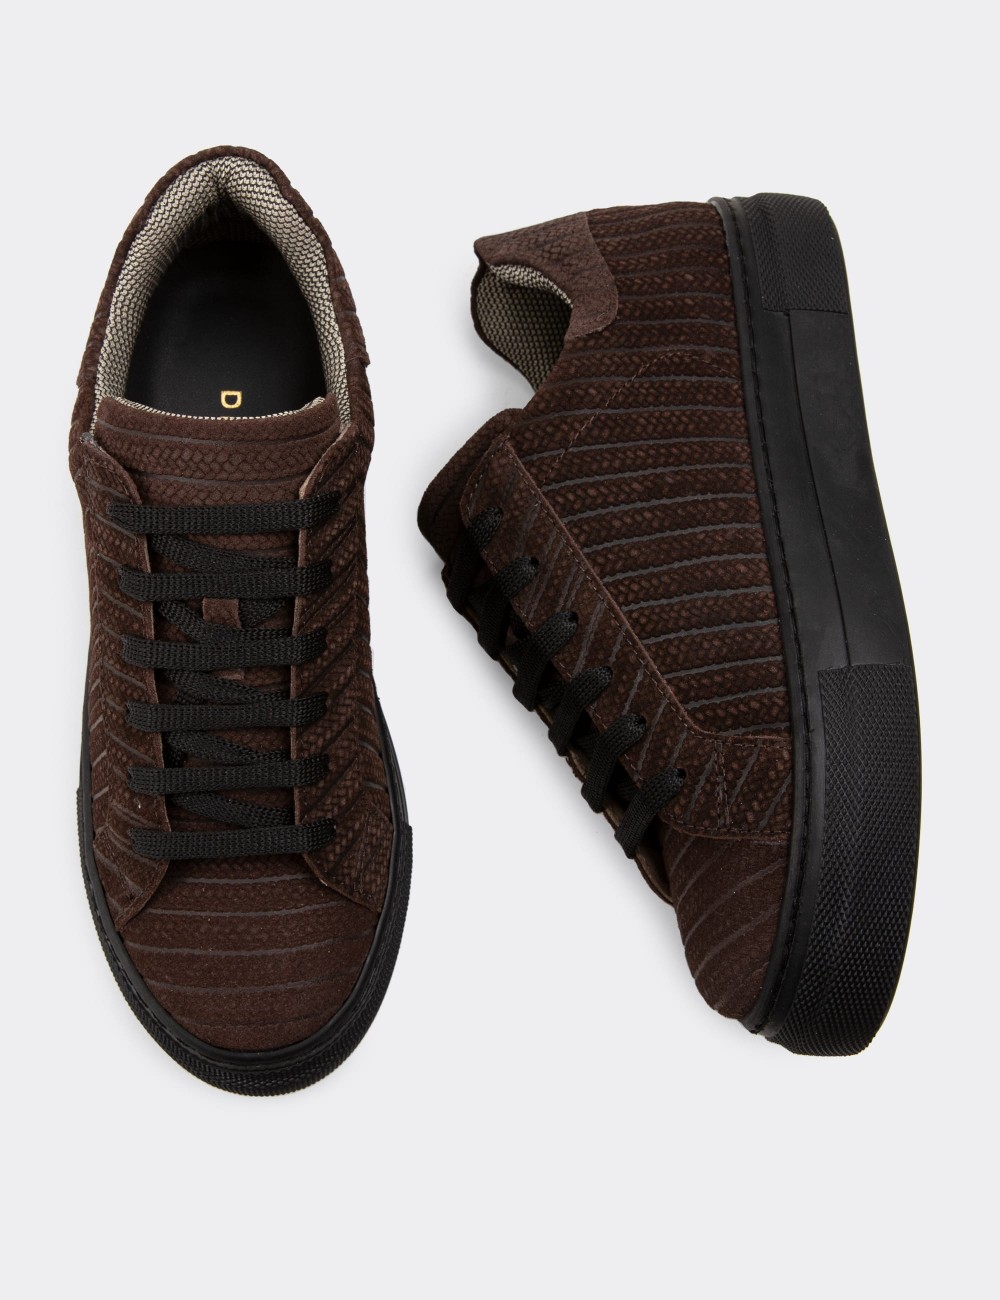 Brown Suede Leather Sneakers - Z1681ZKHVC04